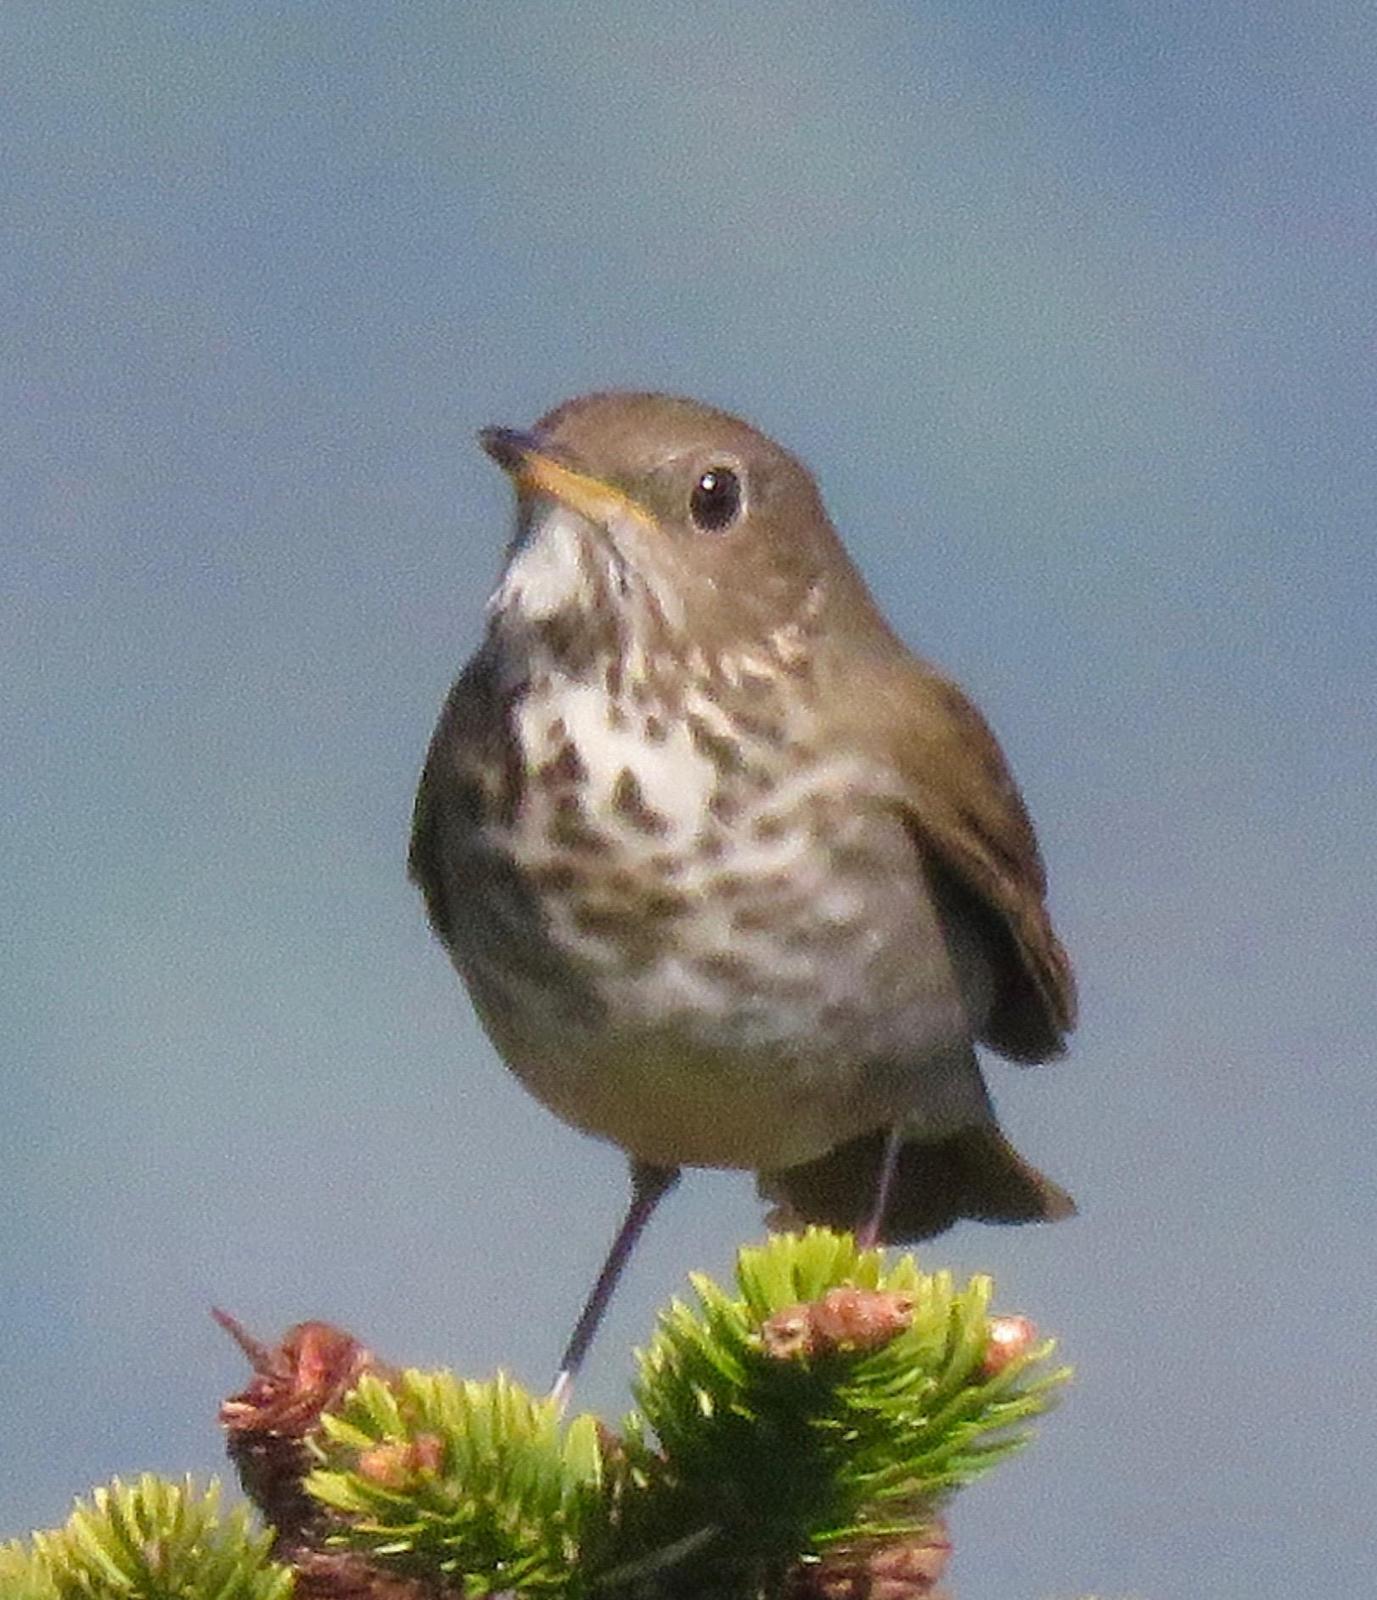 Bicknell's Thrush Photo by Don Glasco